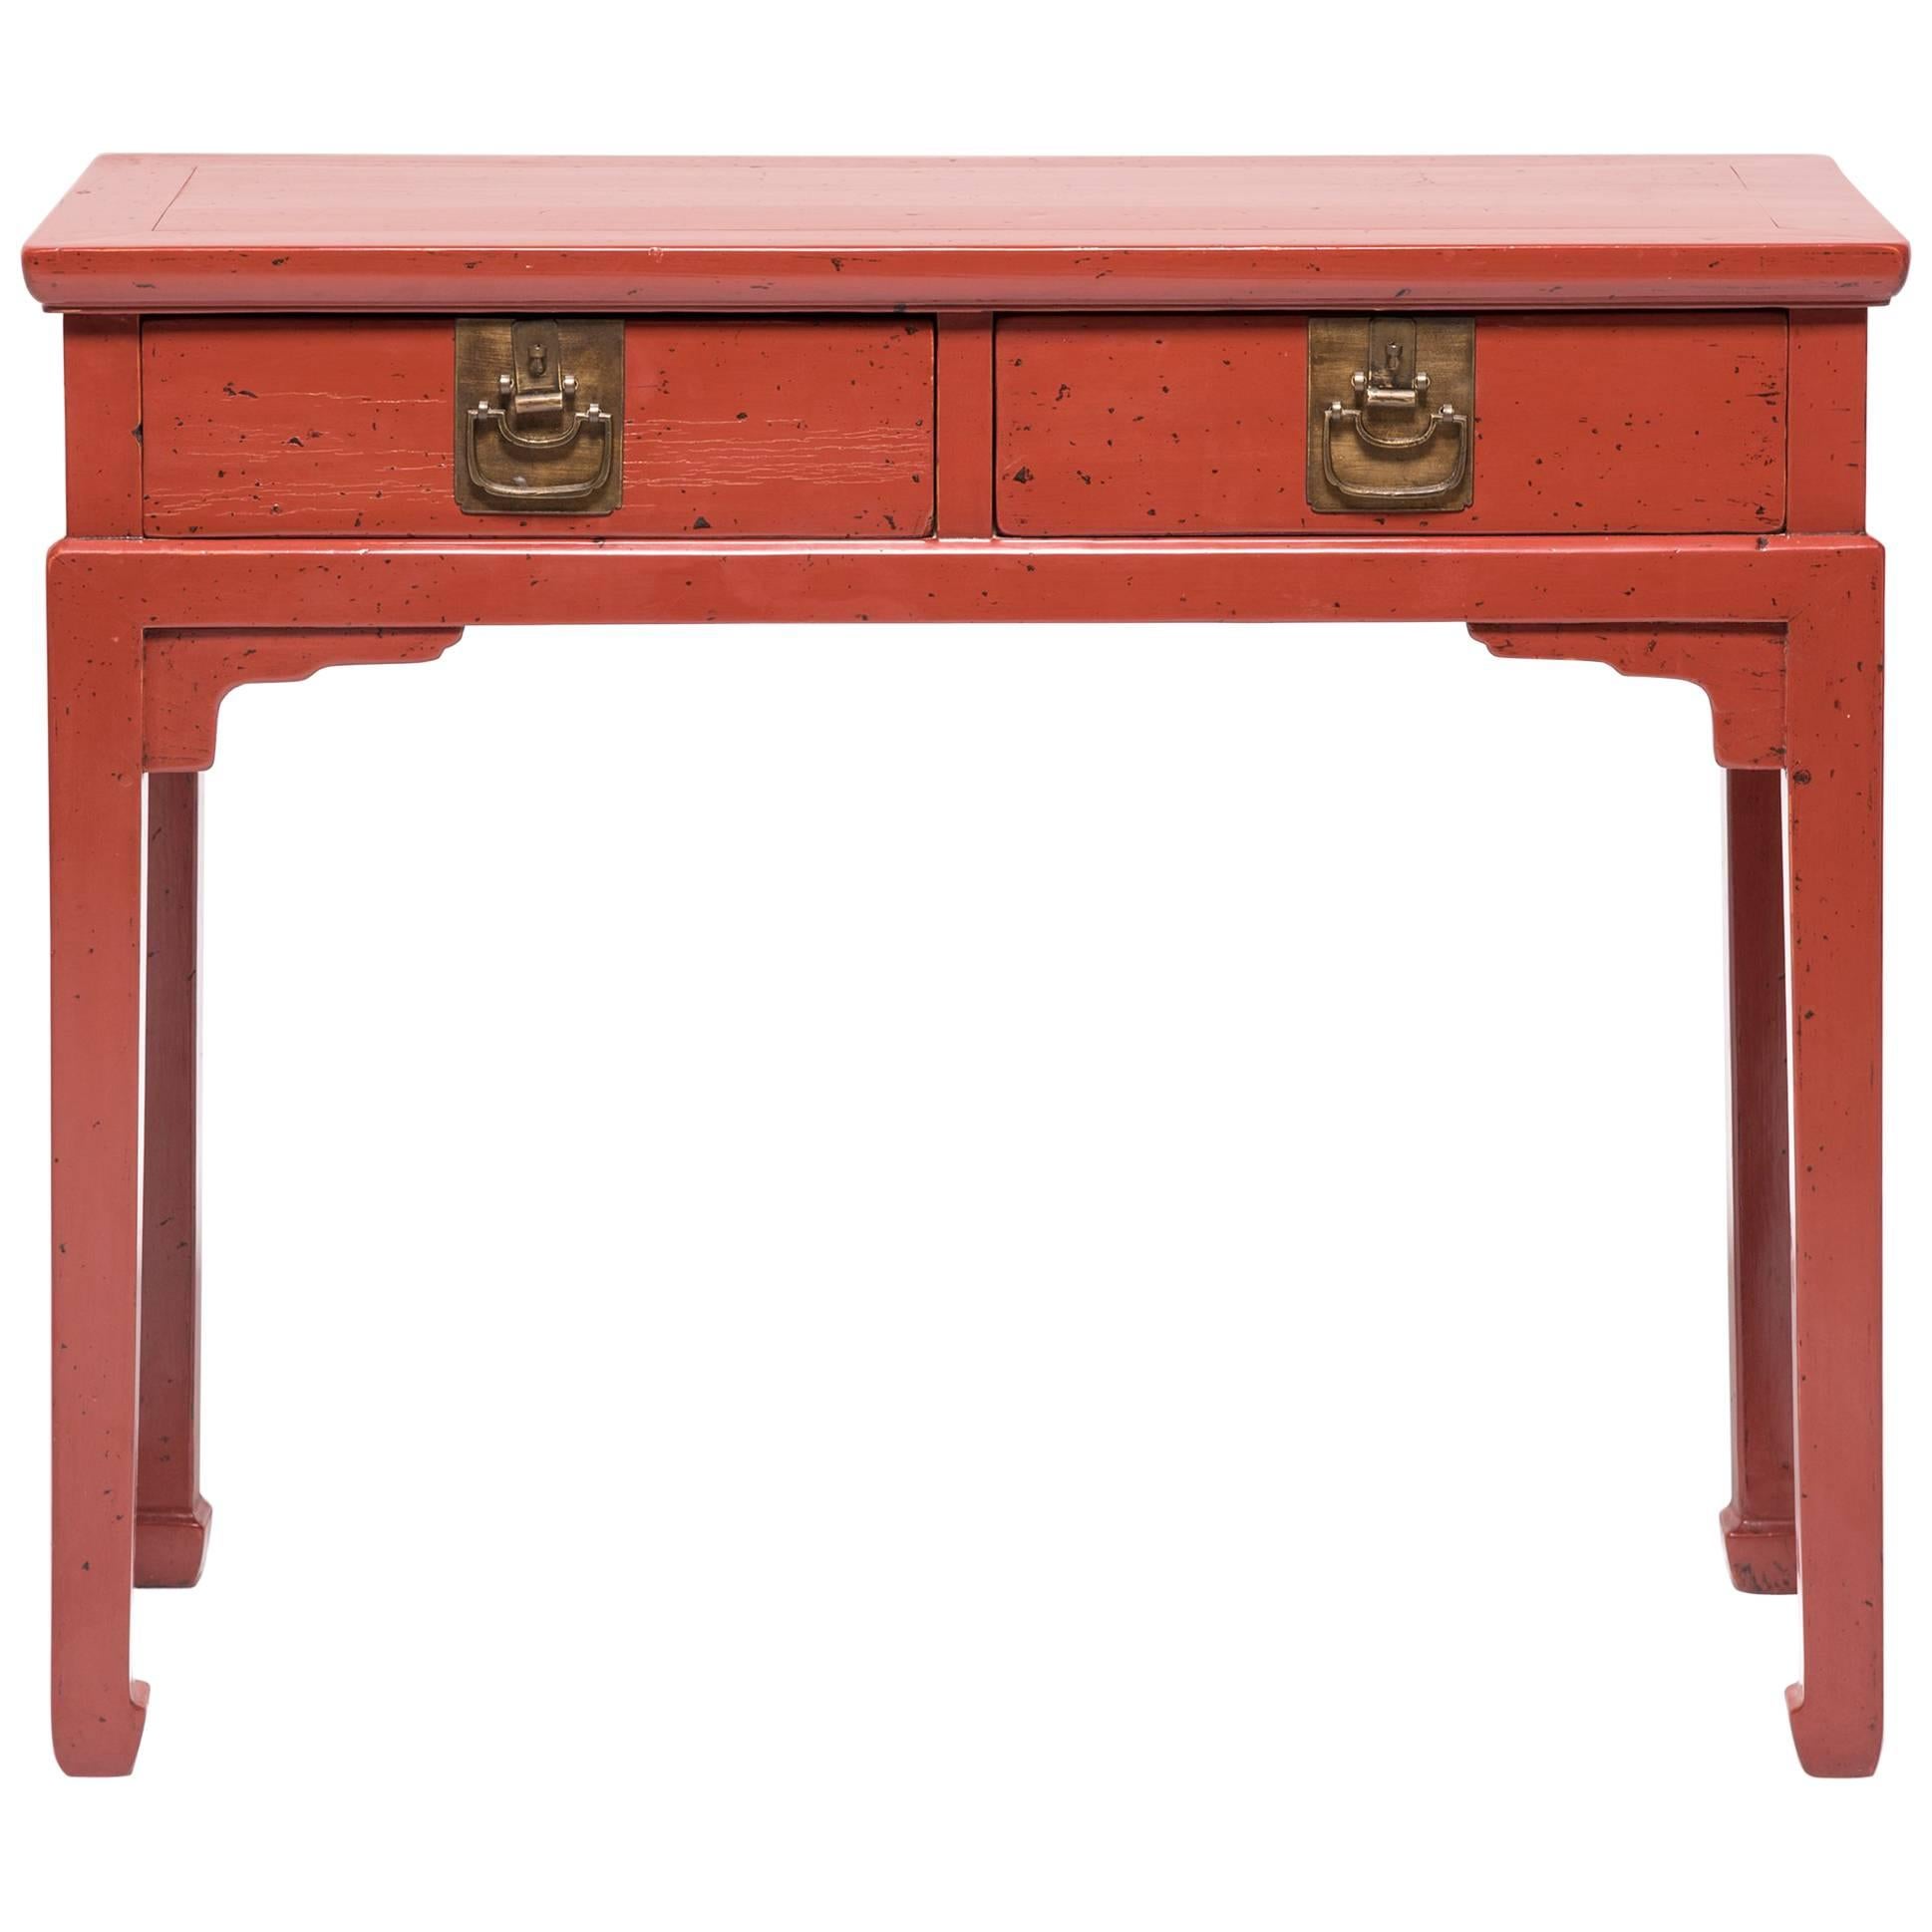 Early 20th Century Chinese Two-Drawer Red Lacquered Table